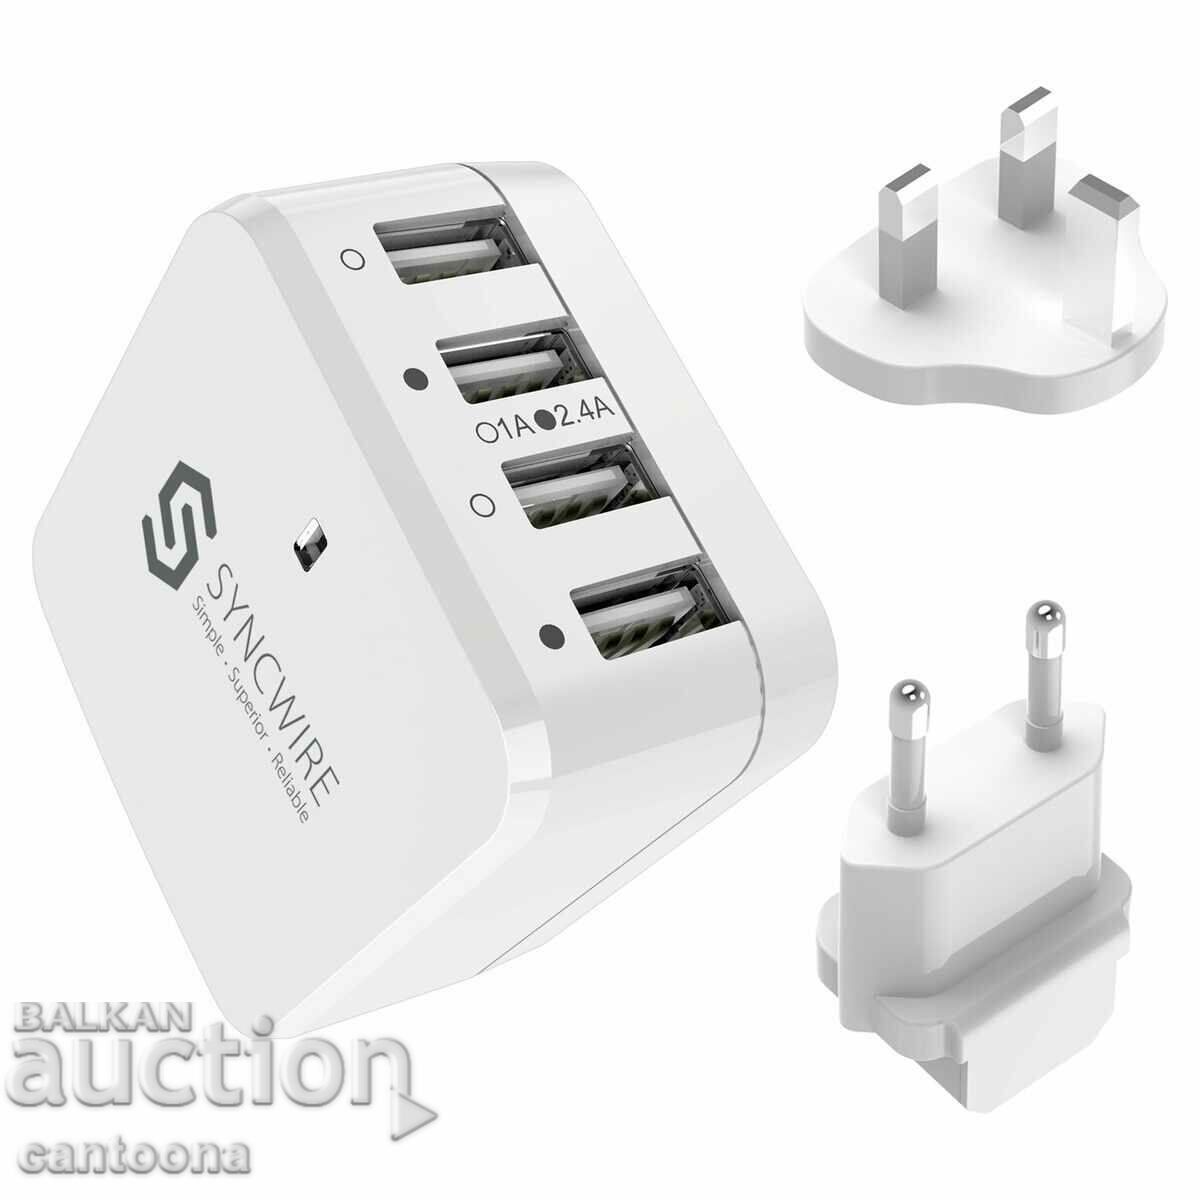 Syncwire Travel Charger 34W/6.8A 4hUSB charger, EU/US/UK